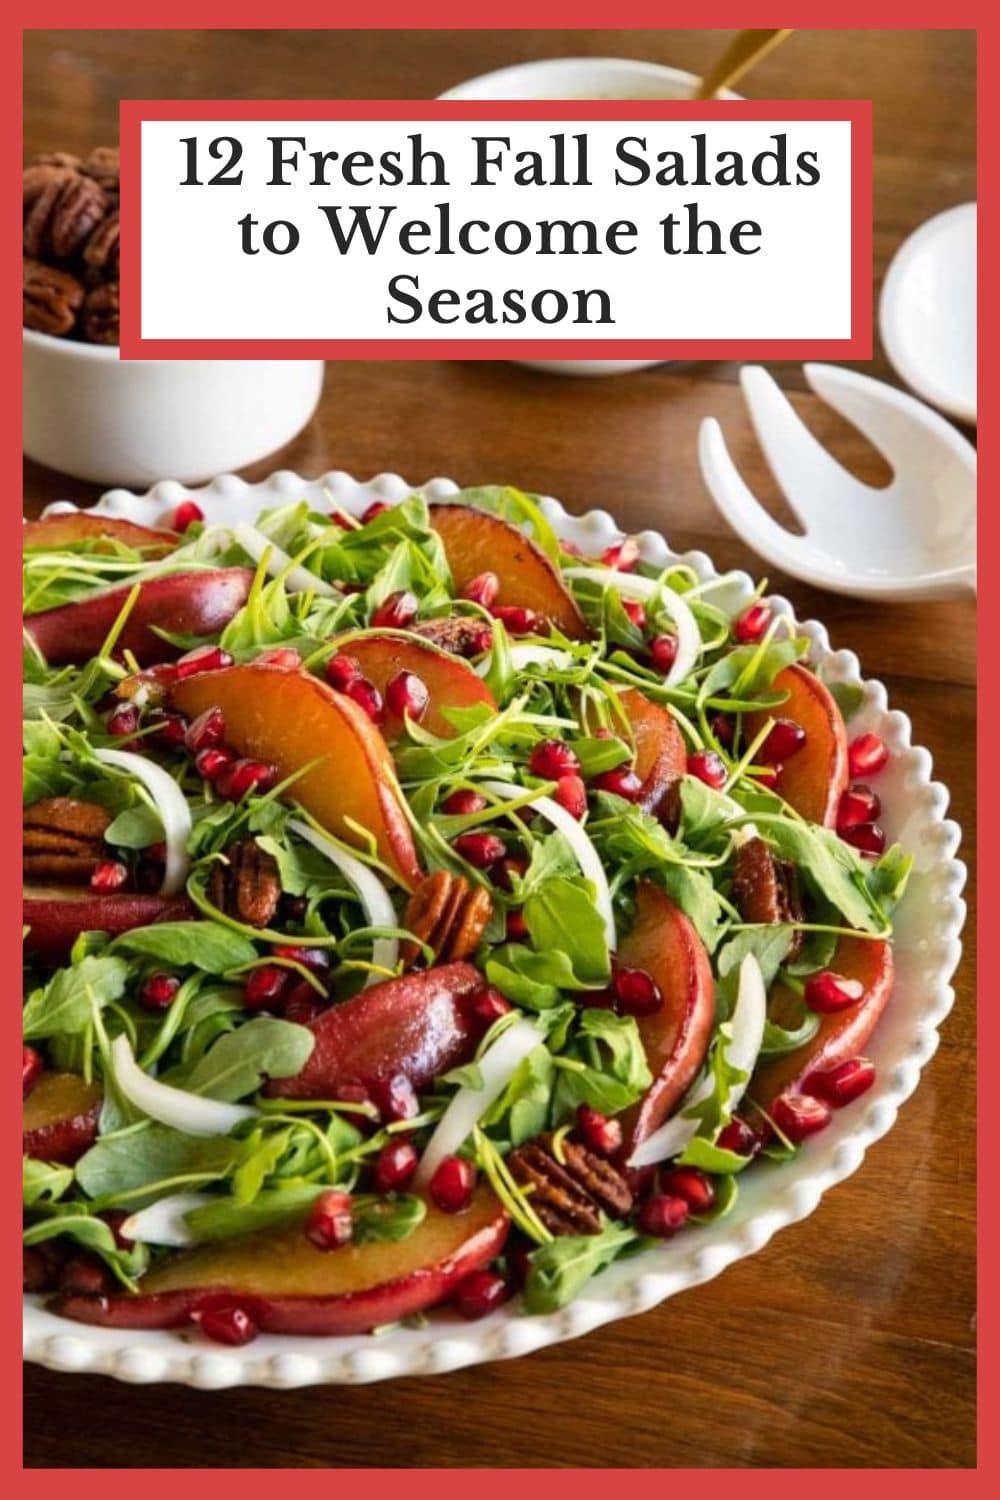 12 Seasonal Salads to Get You in the Mood for Fall!